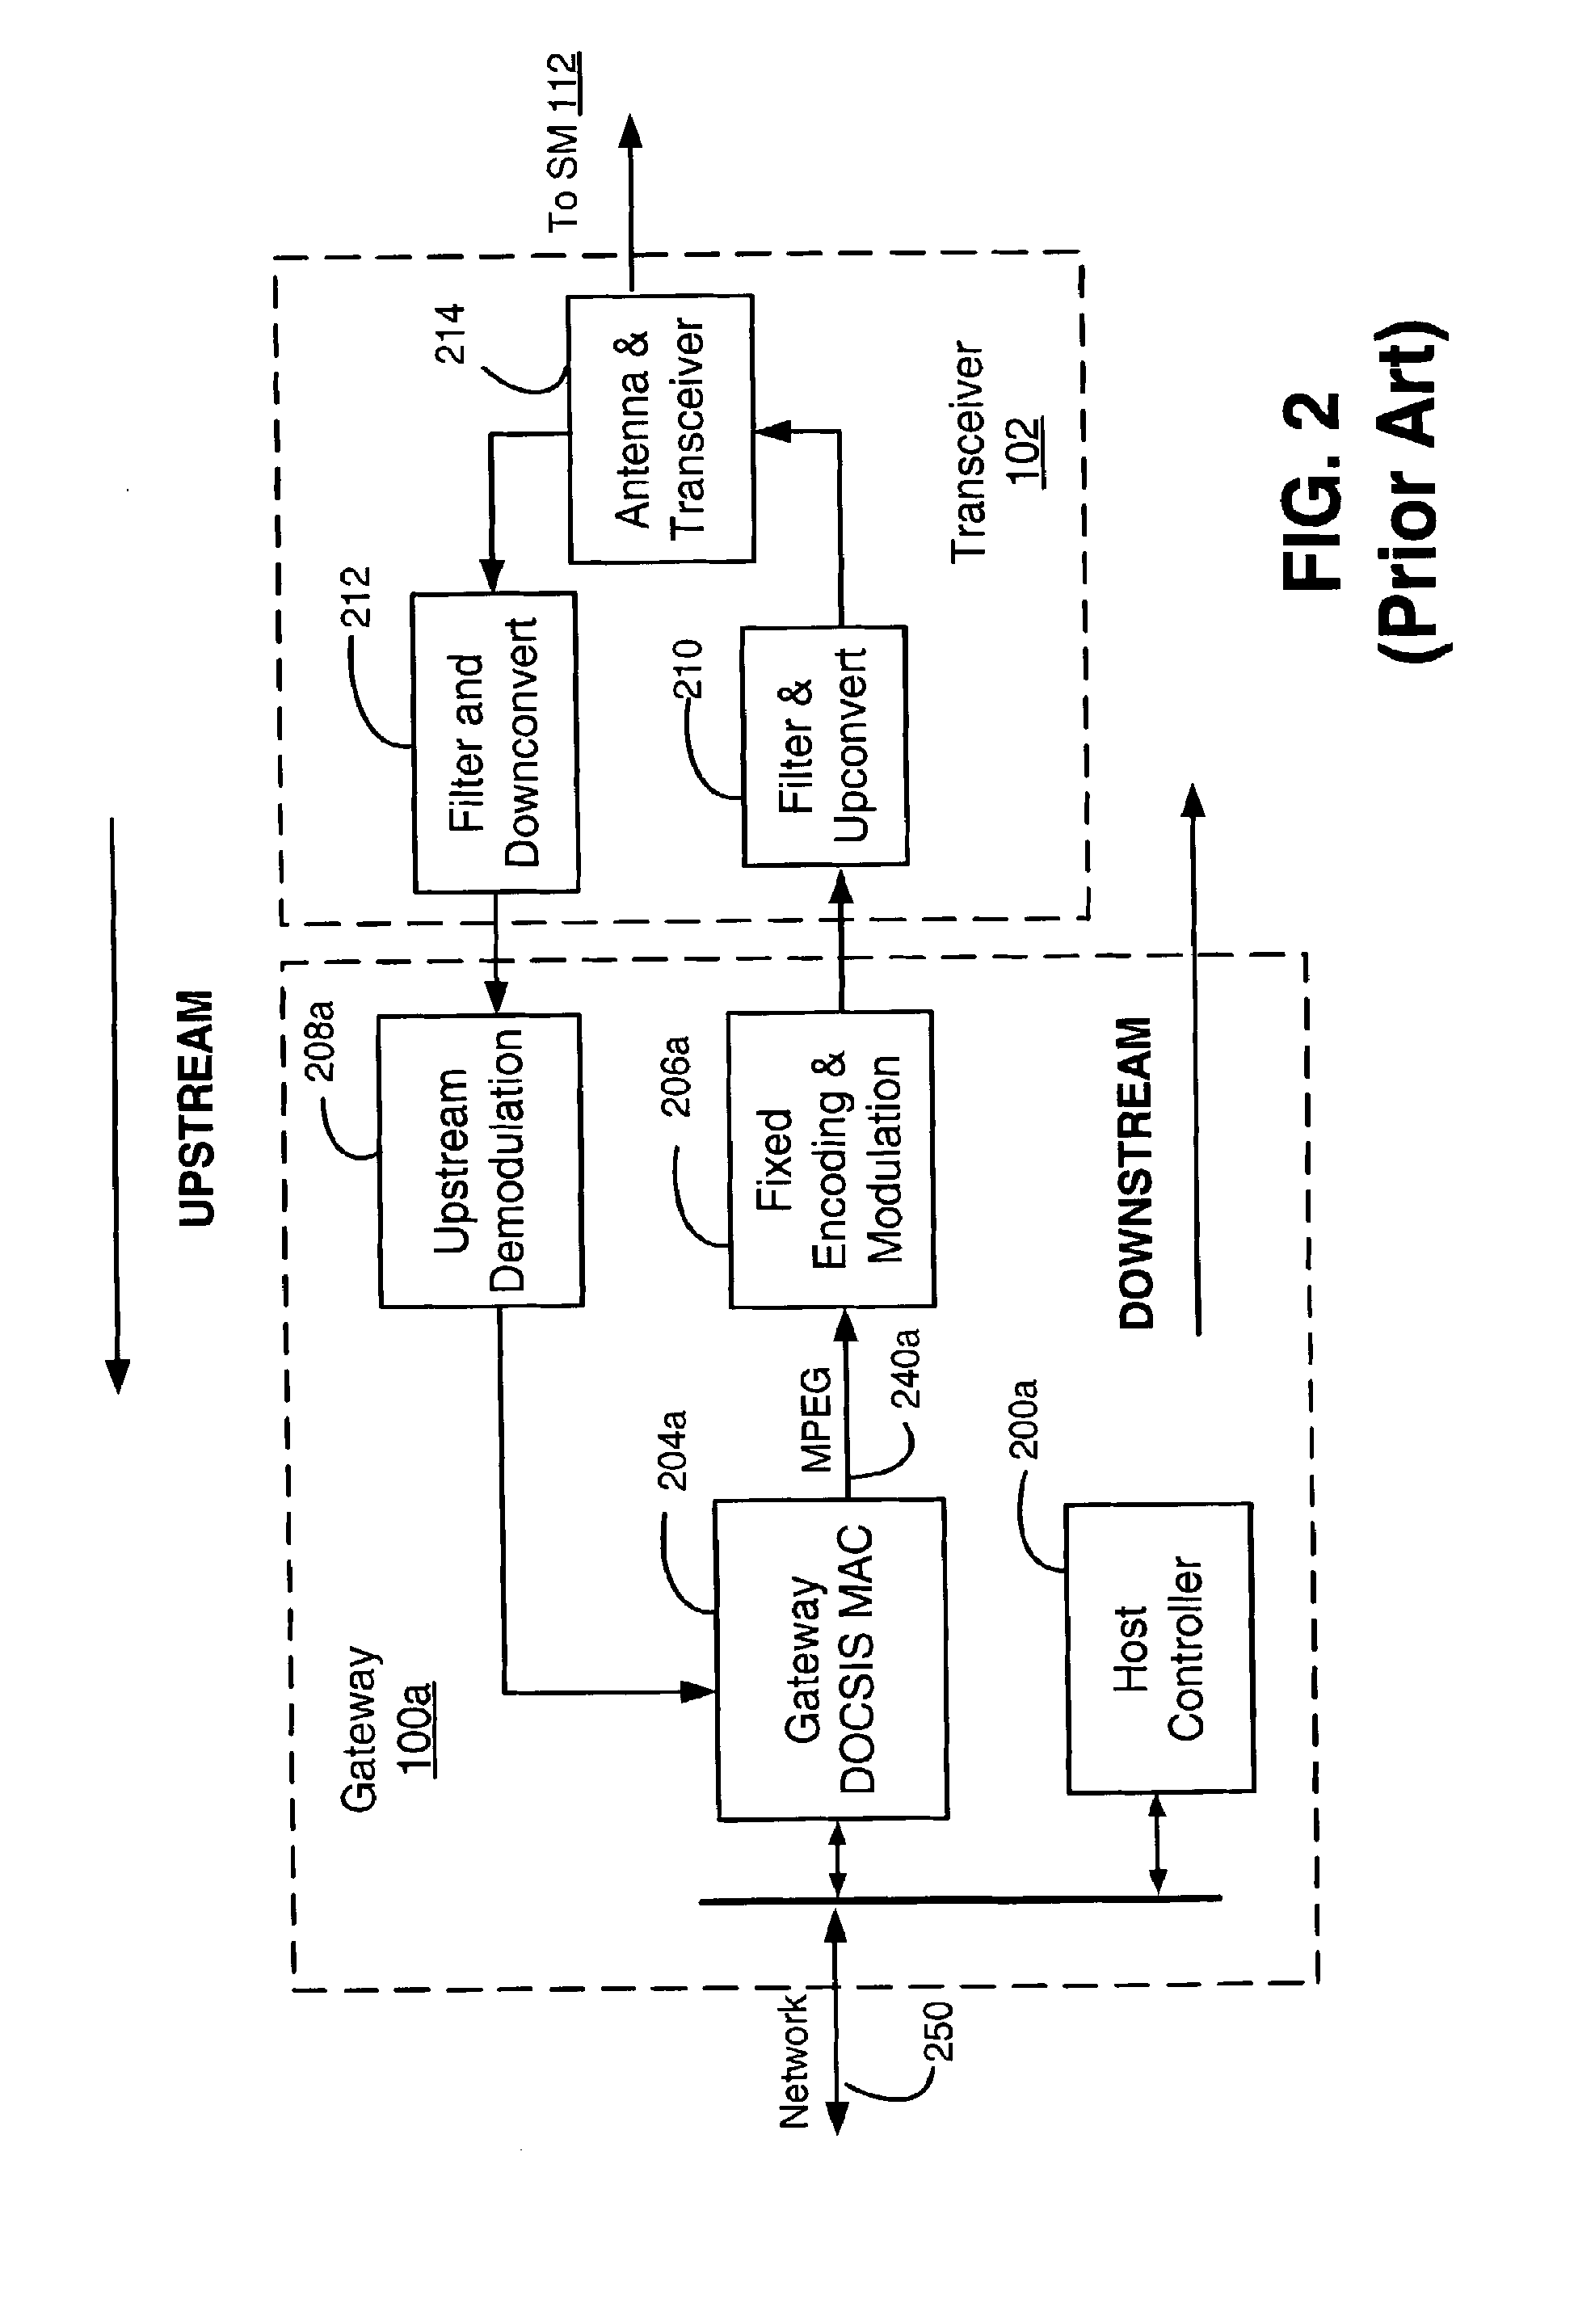 Downstream Time Domain Based Adaptive Modulation for DOCSIS Based Applications